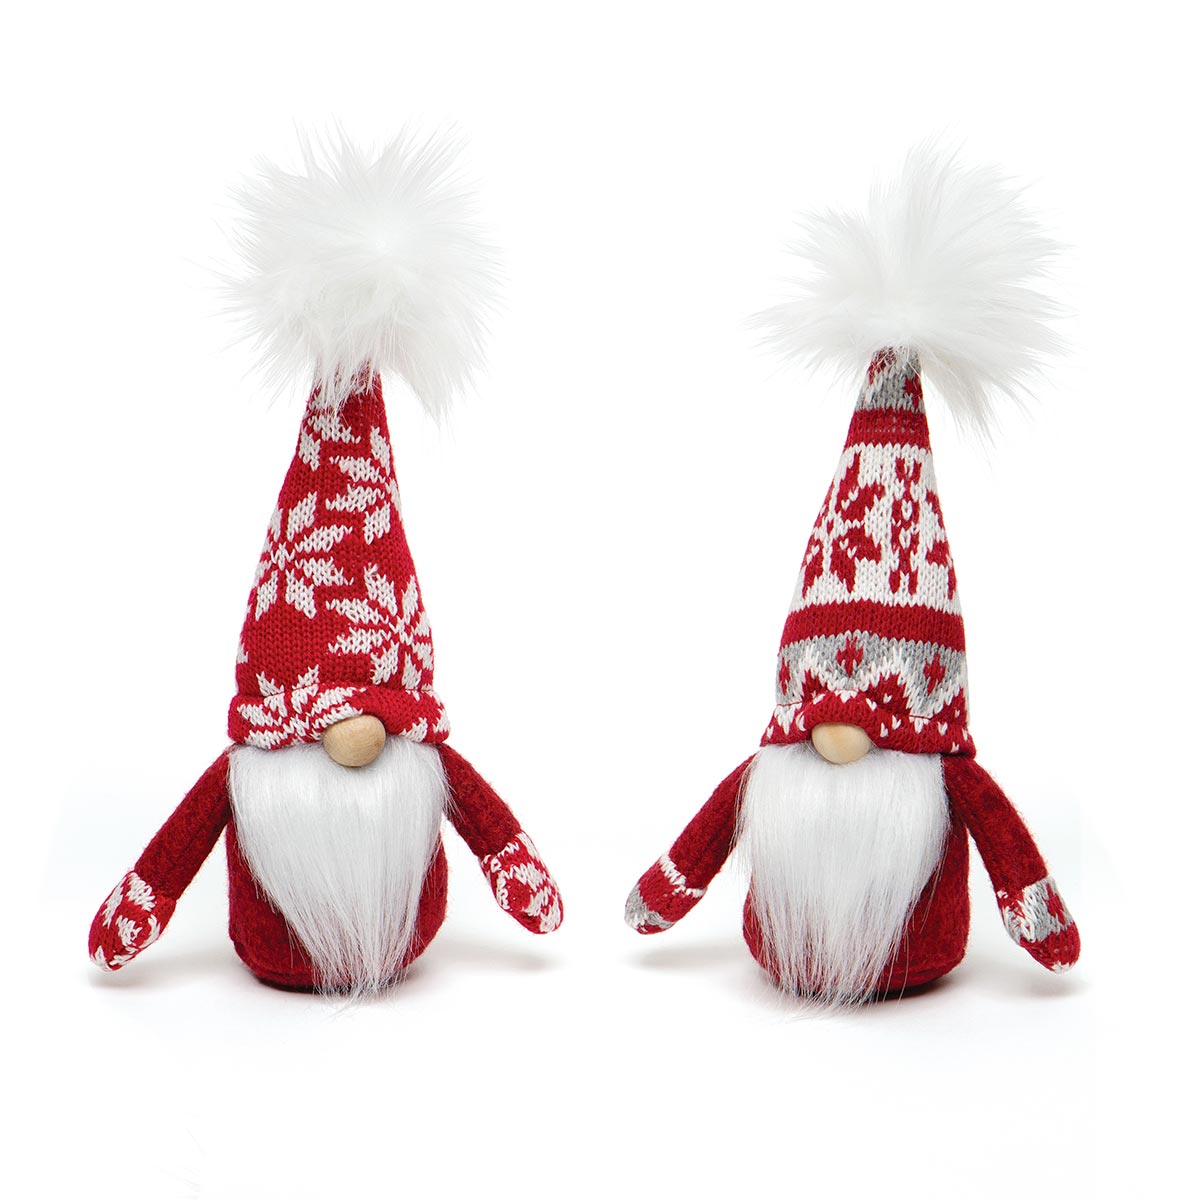 !FINNISH GNOME RED/WHITE WITH FUR POM-POM, SWEATER HAT v22